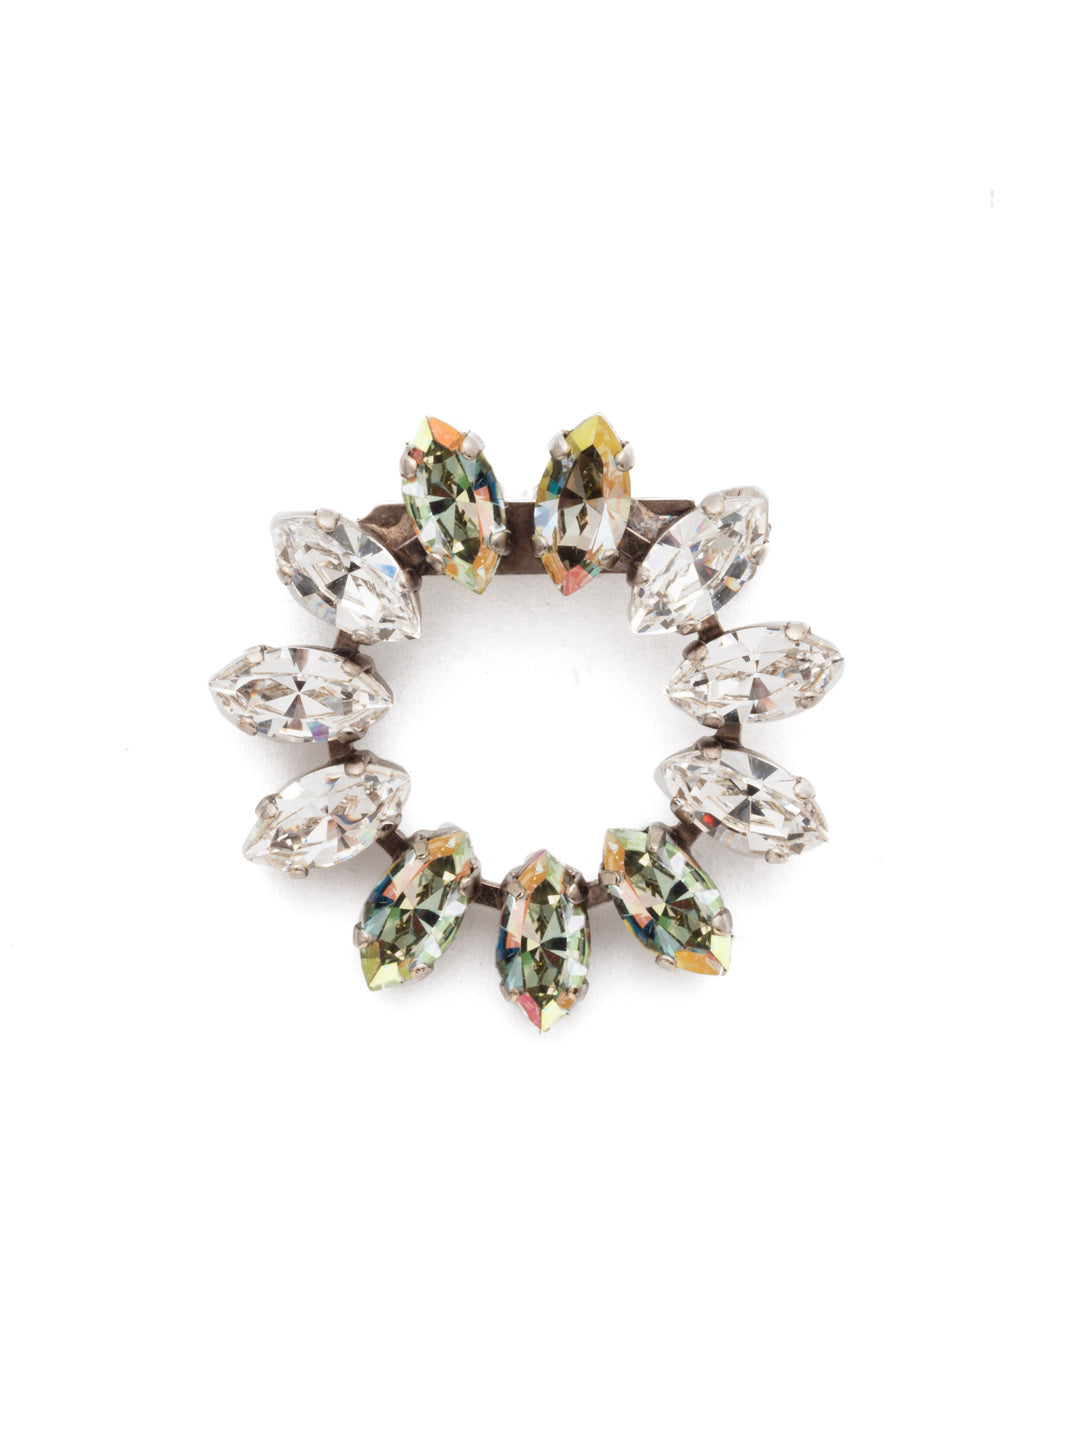 Marcella Brooch Pin - PEP19ASCRE - <p>Fasten on the Marcella Pin and you've got a perfect circle of sparkling navette crystals to take your outfit, or even a purse, up a notch. From Sorrelli's Crystal Envy collection in our Antique Silver-tone finish.</p>